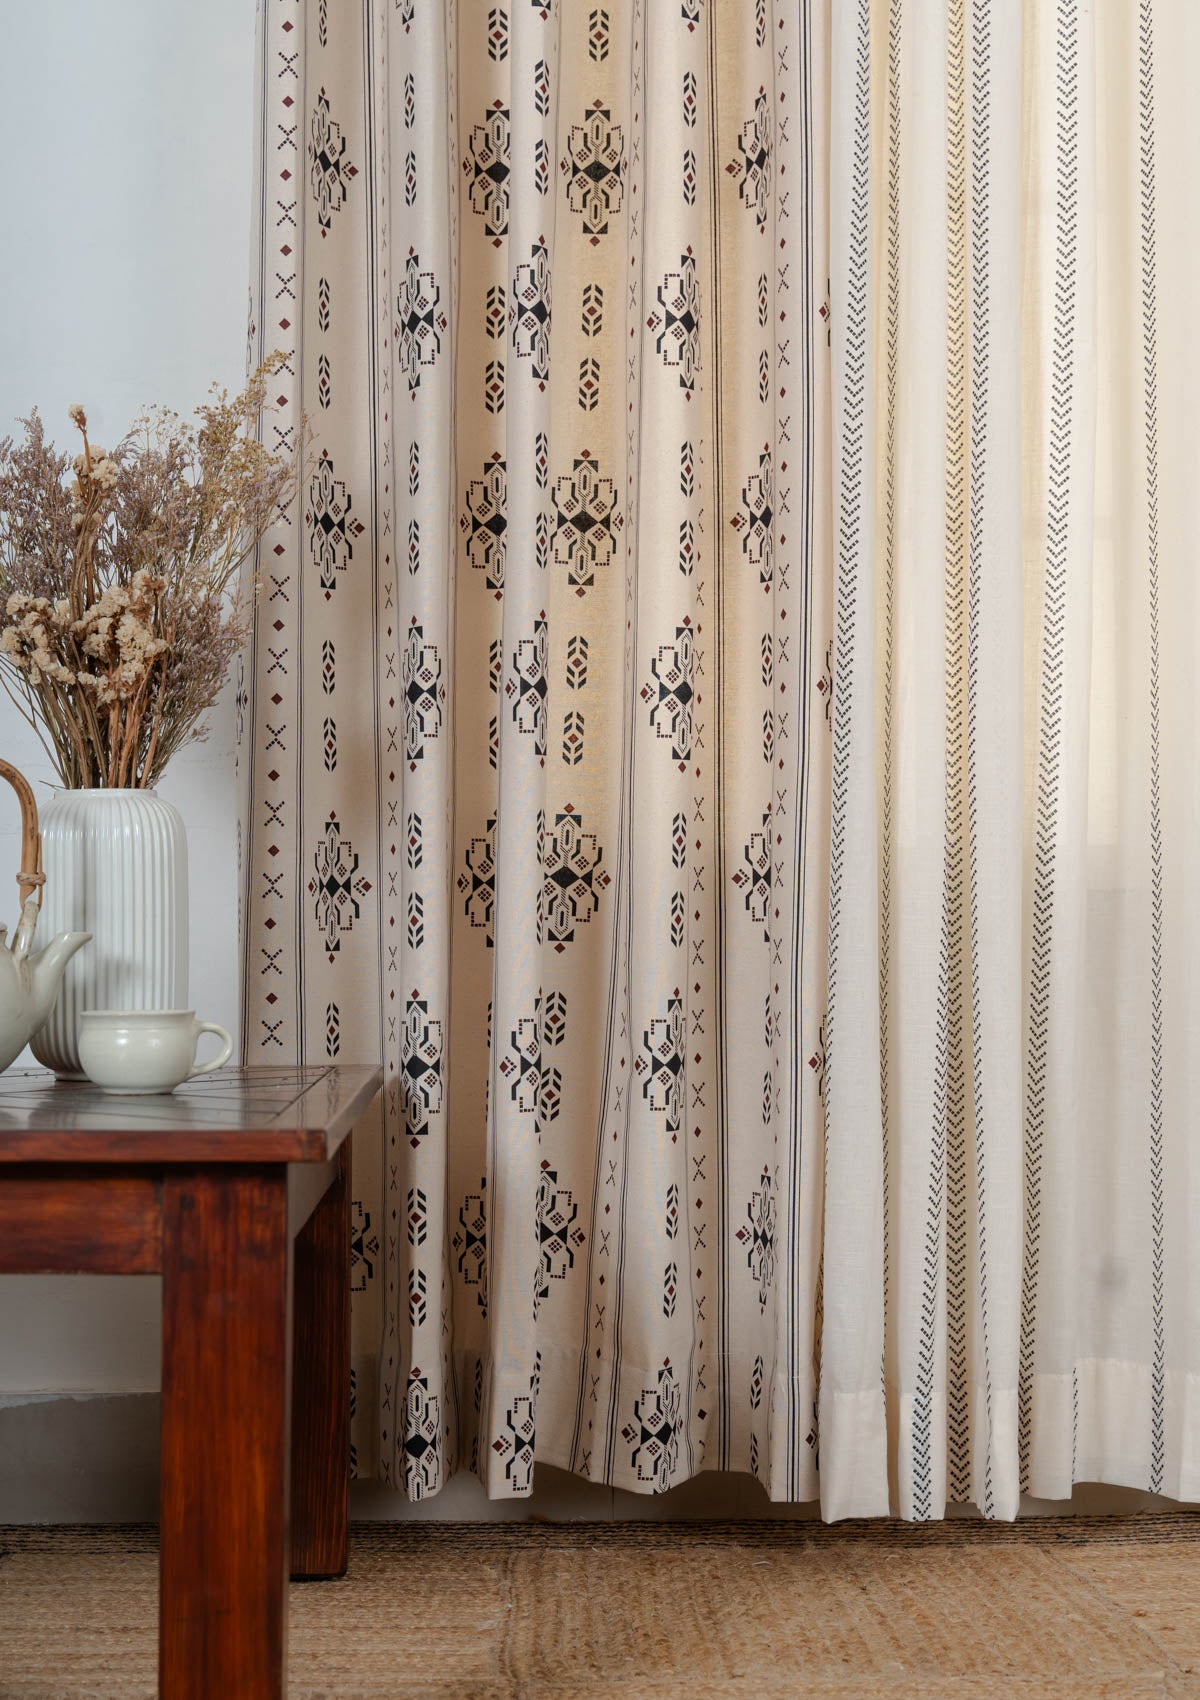 Gypsy floral cotton curtain with Spear geometric sheer 100% cotton curtains for living room - Set of 4